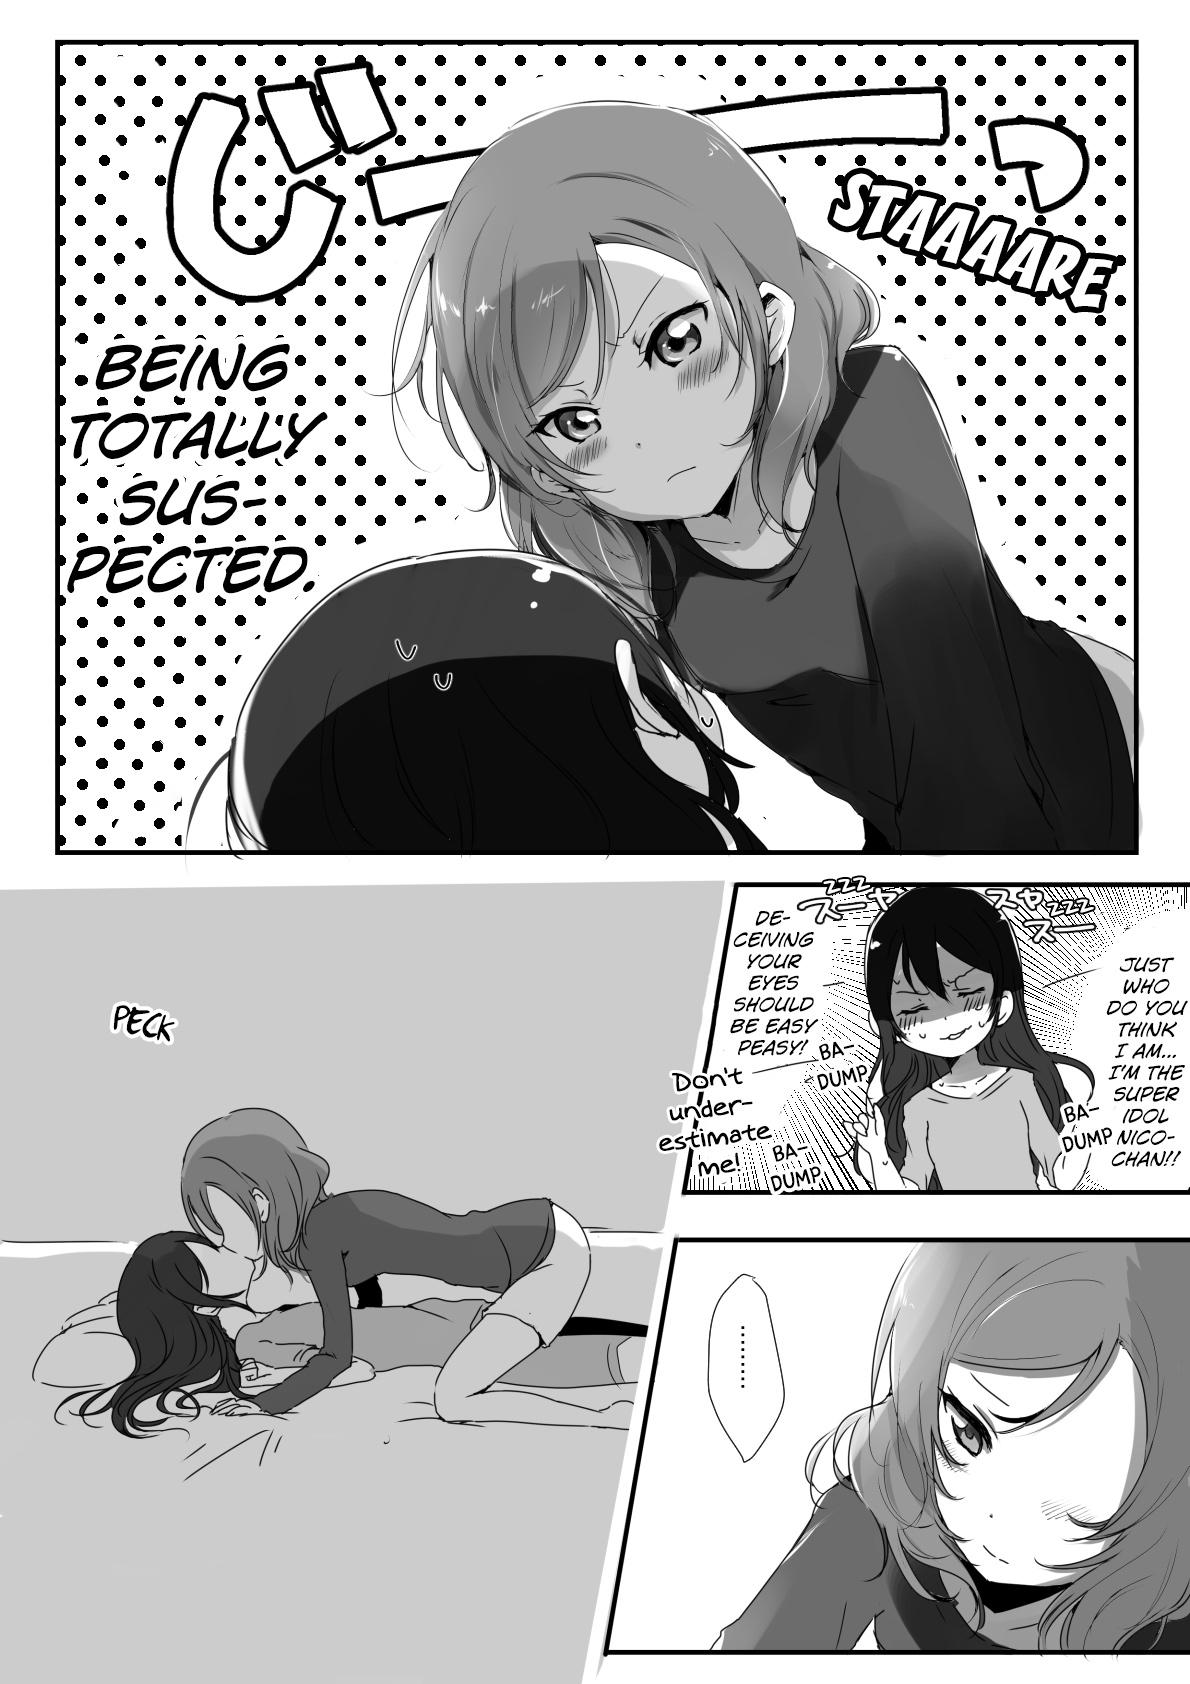 Argenta Kanojo - Love live Free Blowjobs - Page 3